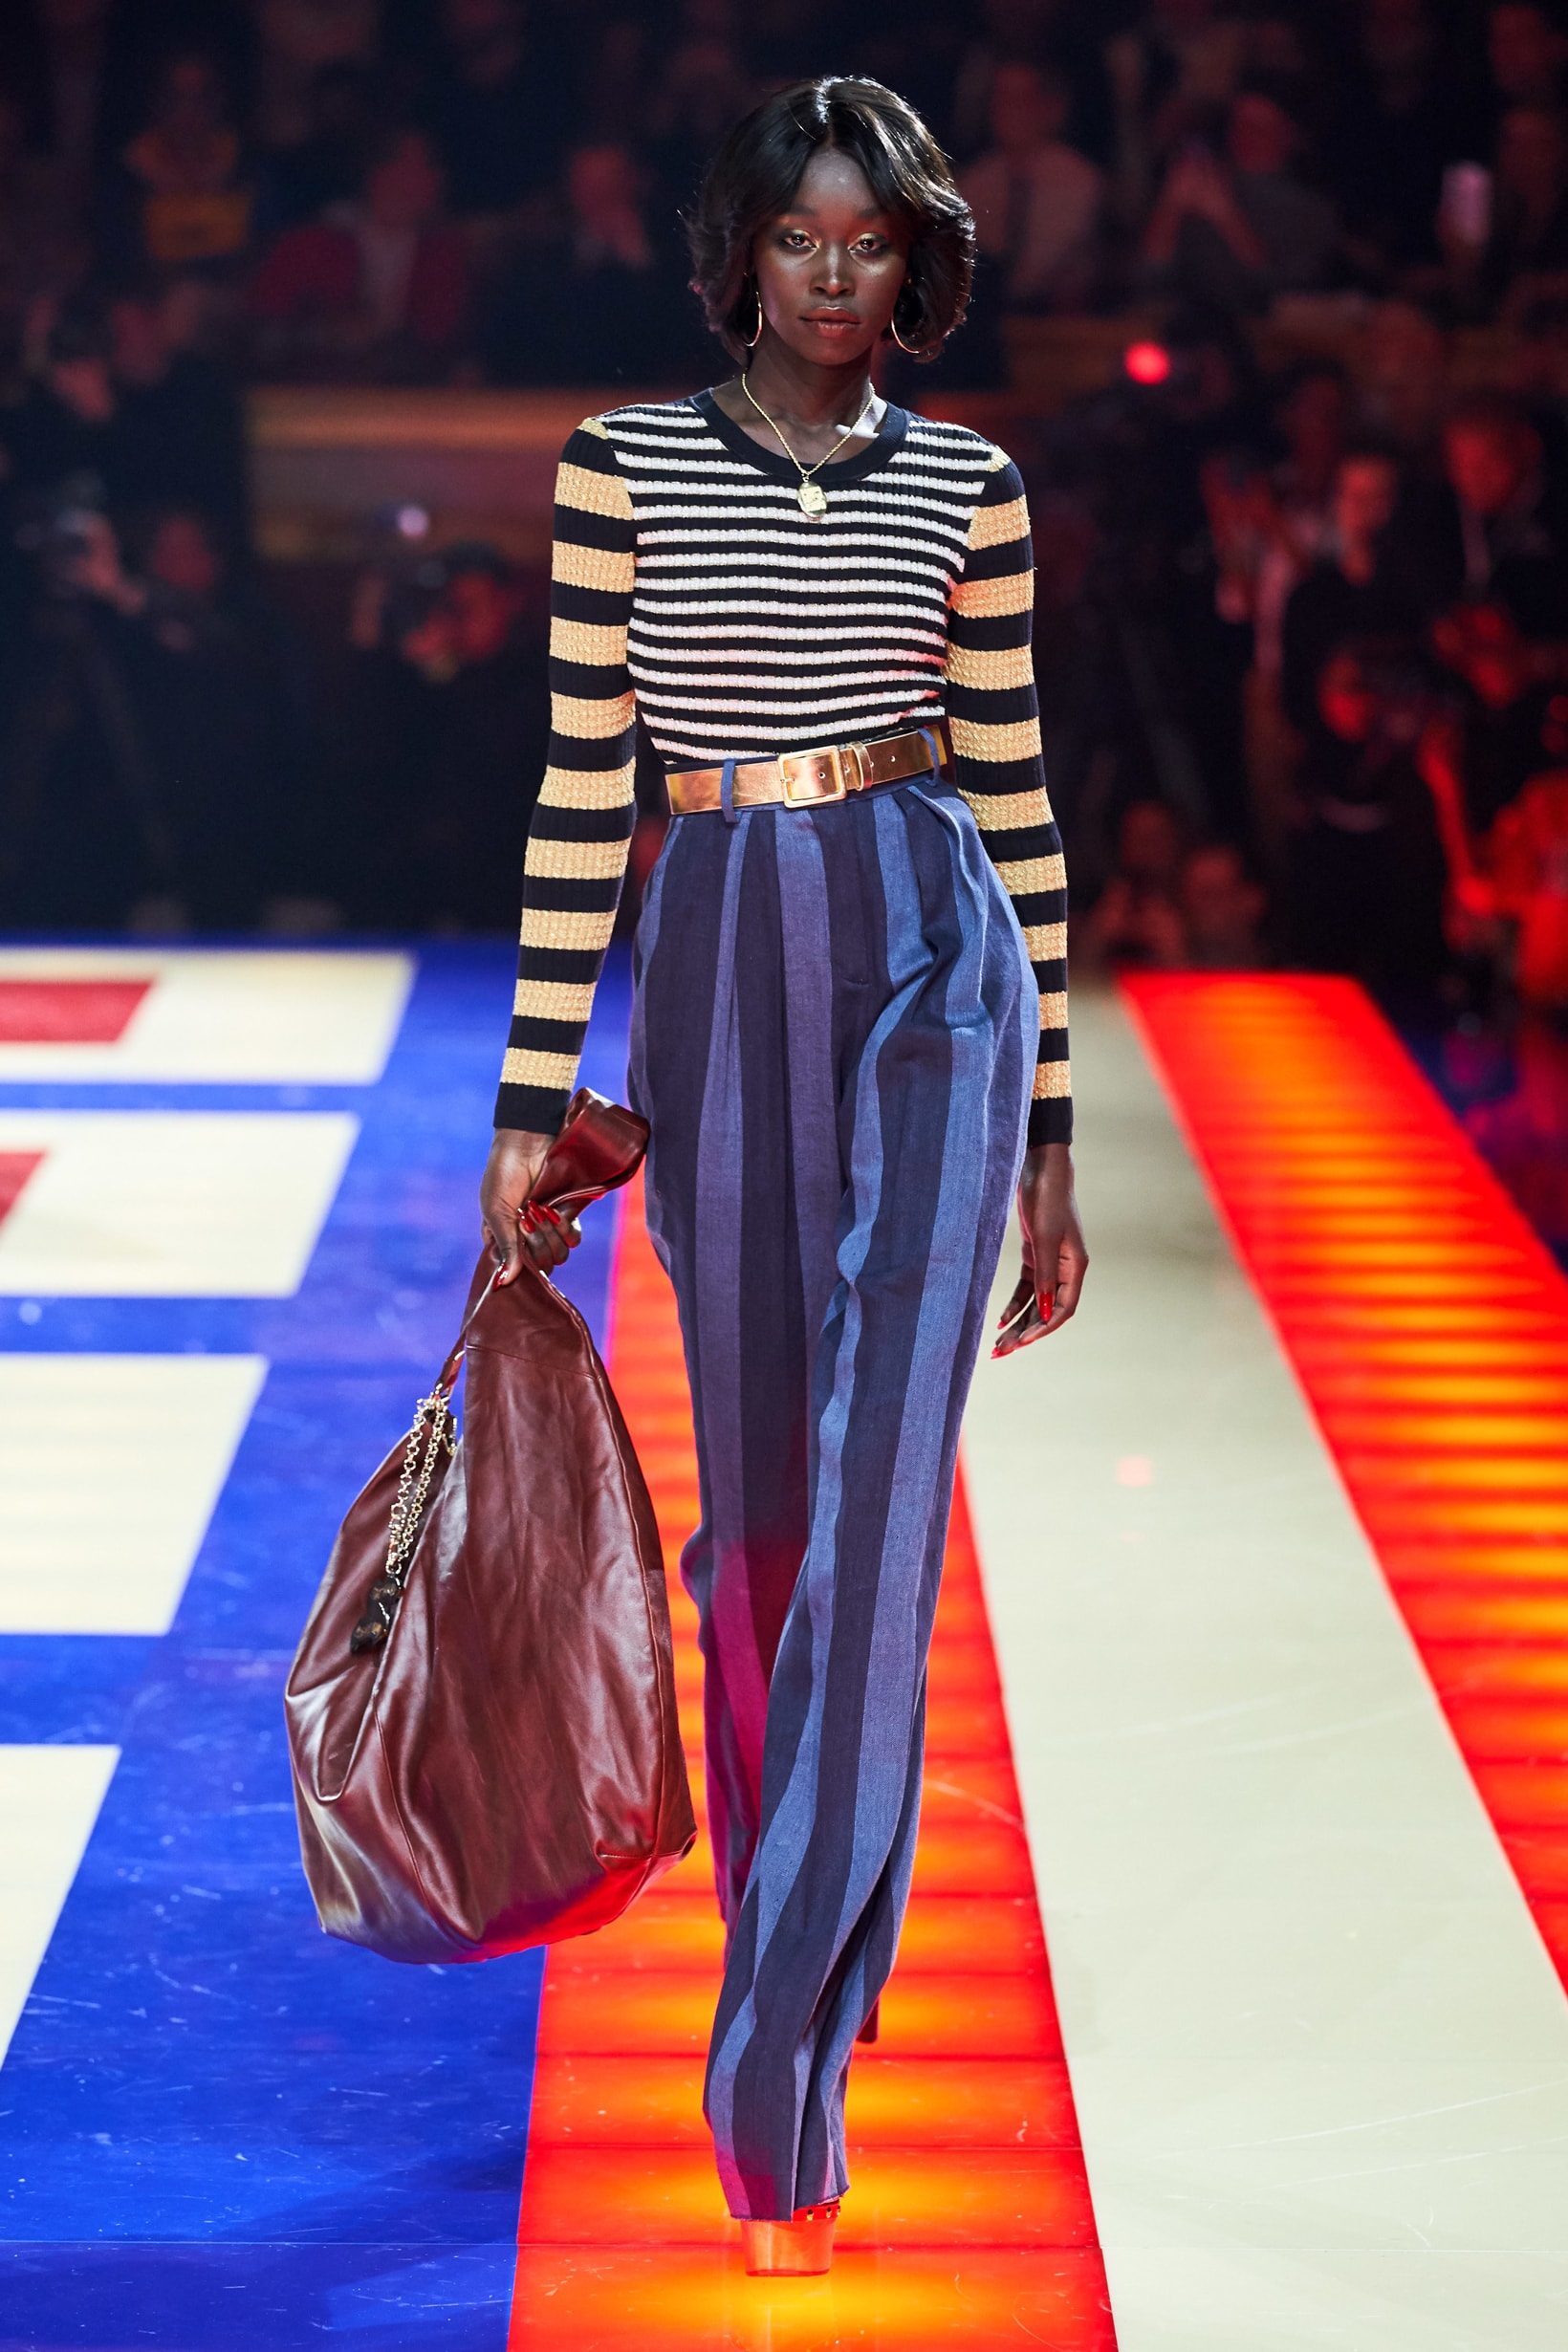 Tommy Hilfiger TommyNow Zendaya Spring 2019 Paris Fashion Week Show Collection Striped Top Yellow Brown Pants Blue